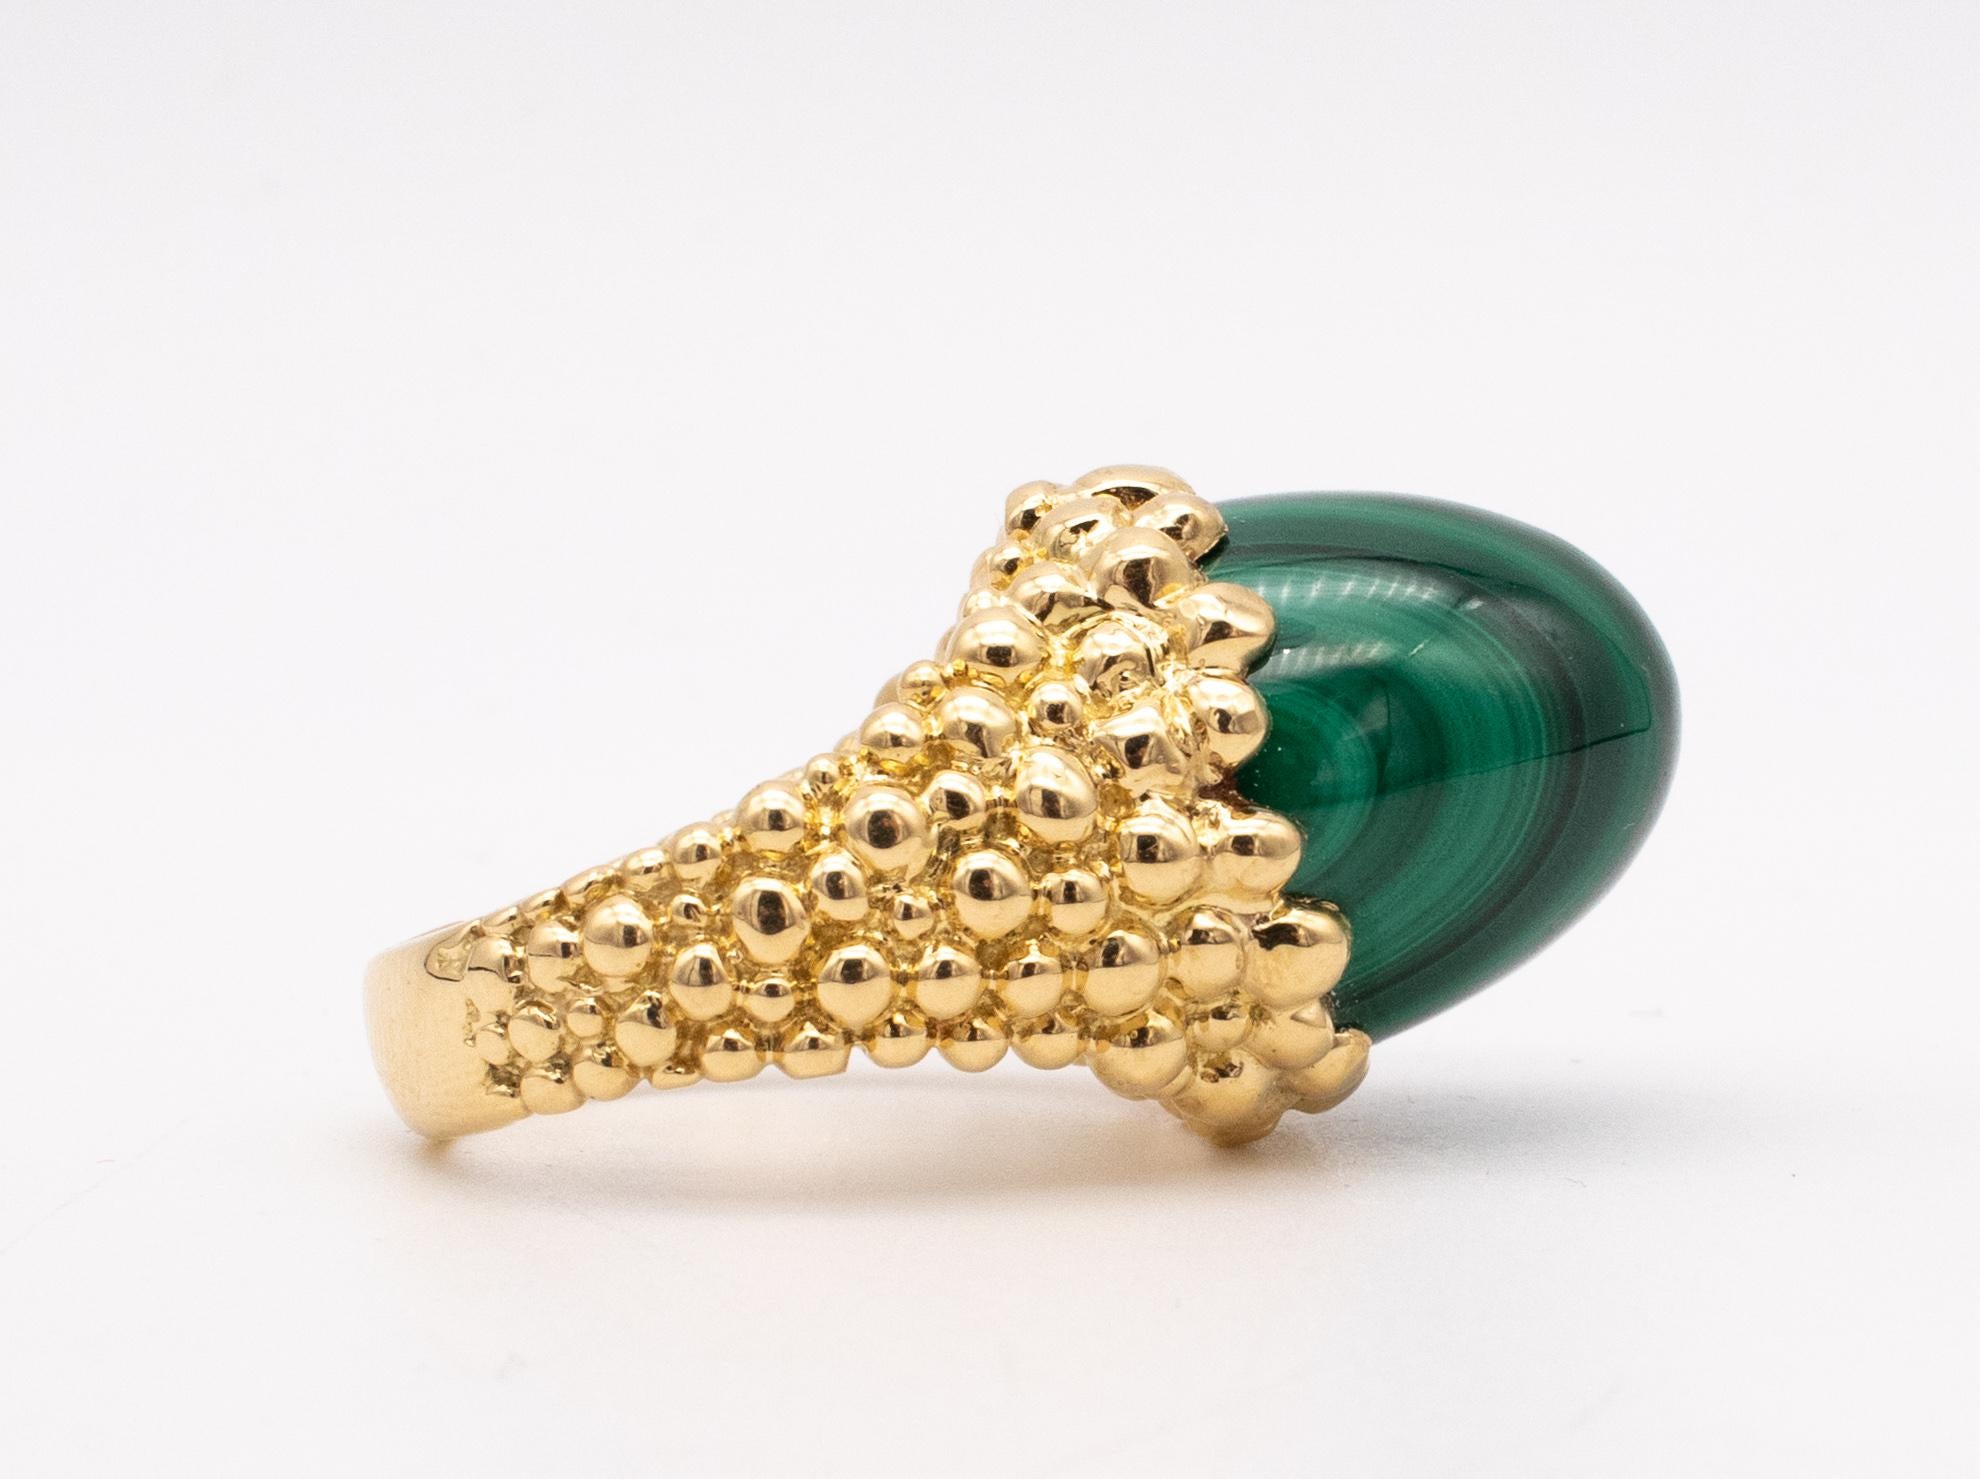 Kutchinsky 1972 London 18kt Yellow Gold Retro Cocktail Ring with Malachite For Sale 3